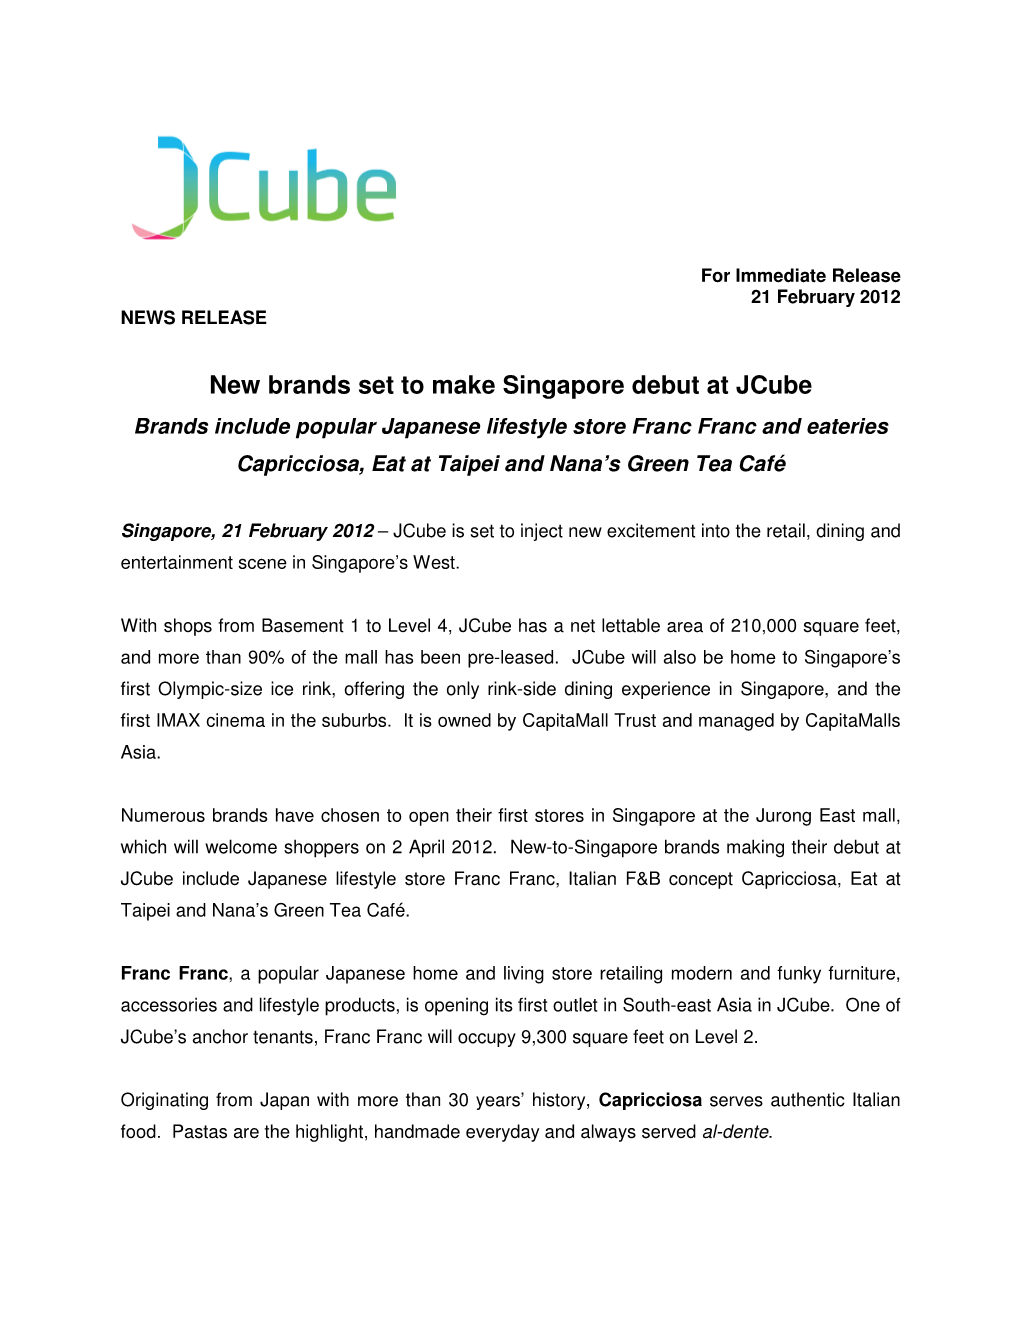 New Brands Set to Make Singapore Debut at Jcube